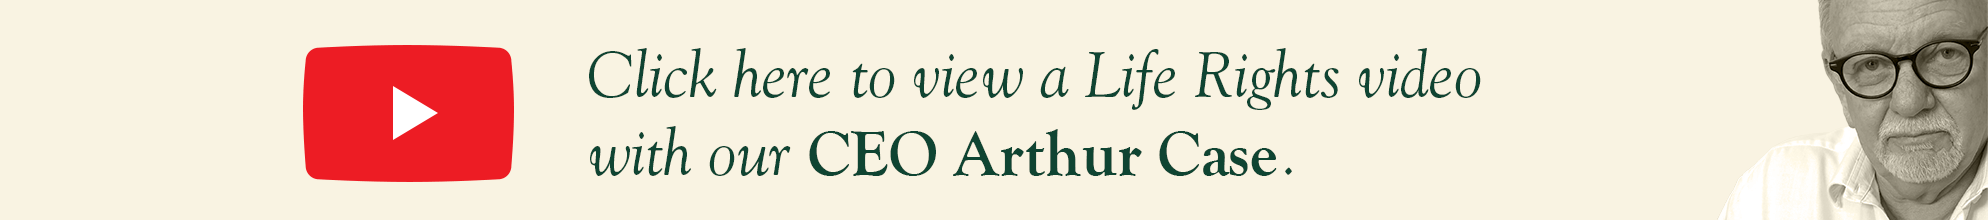 Click here to view a Life Rights video with Arthur Case